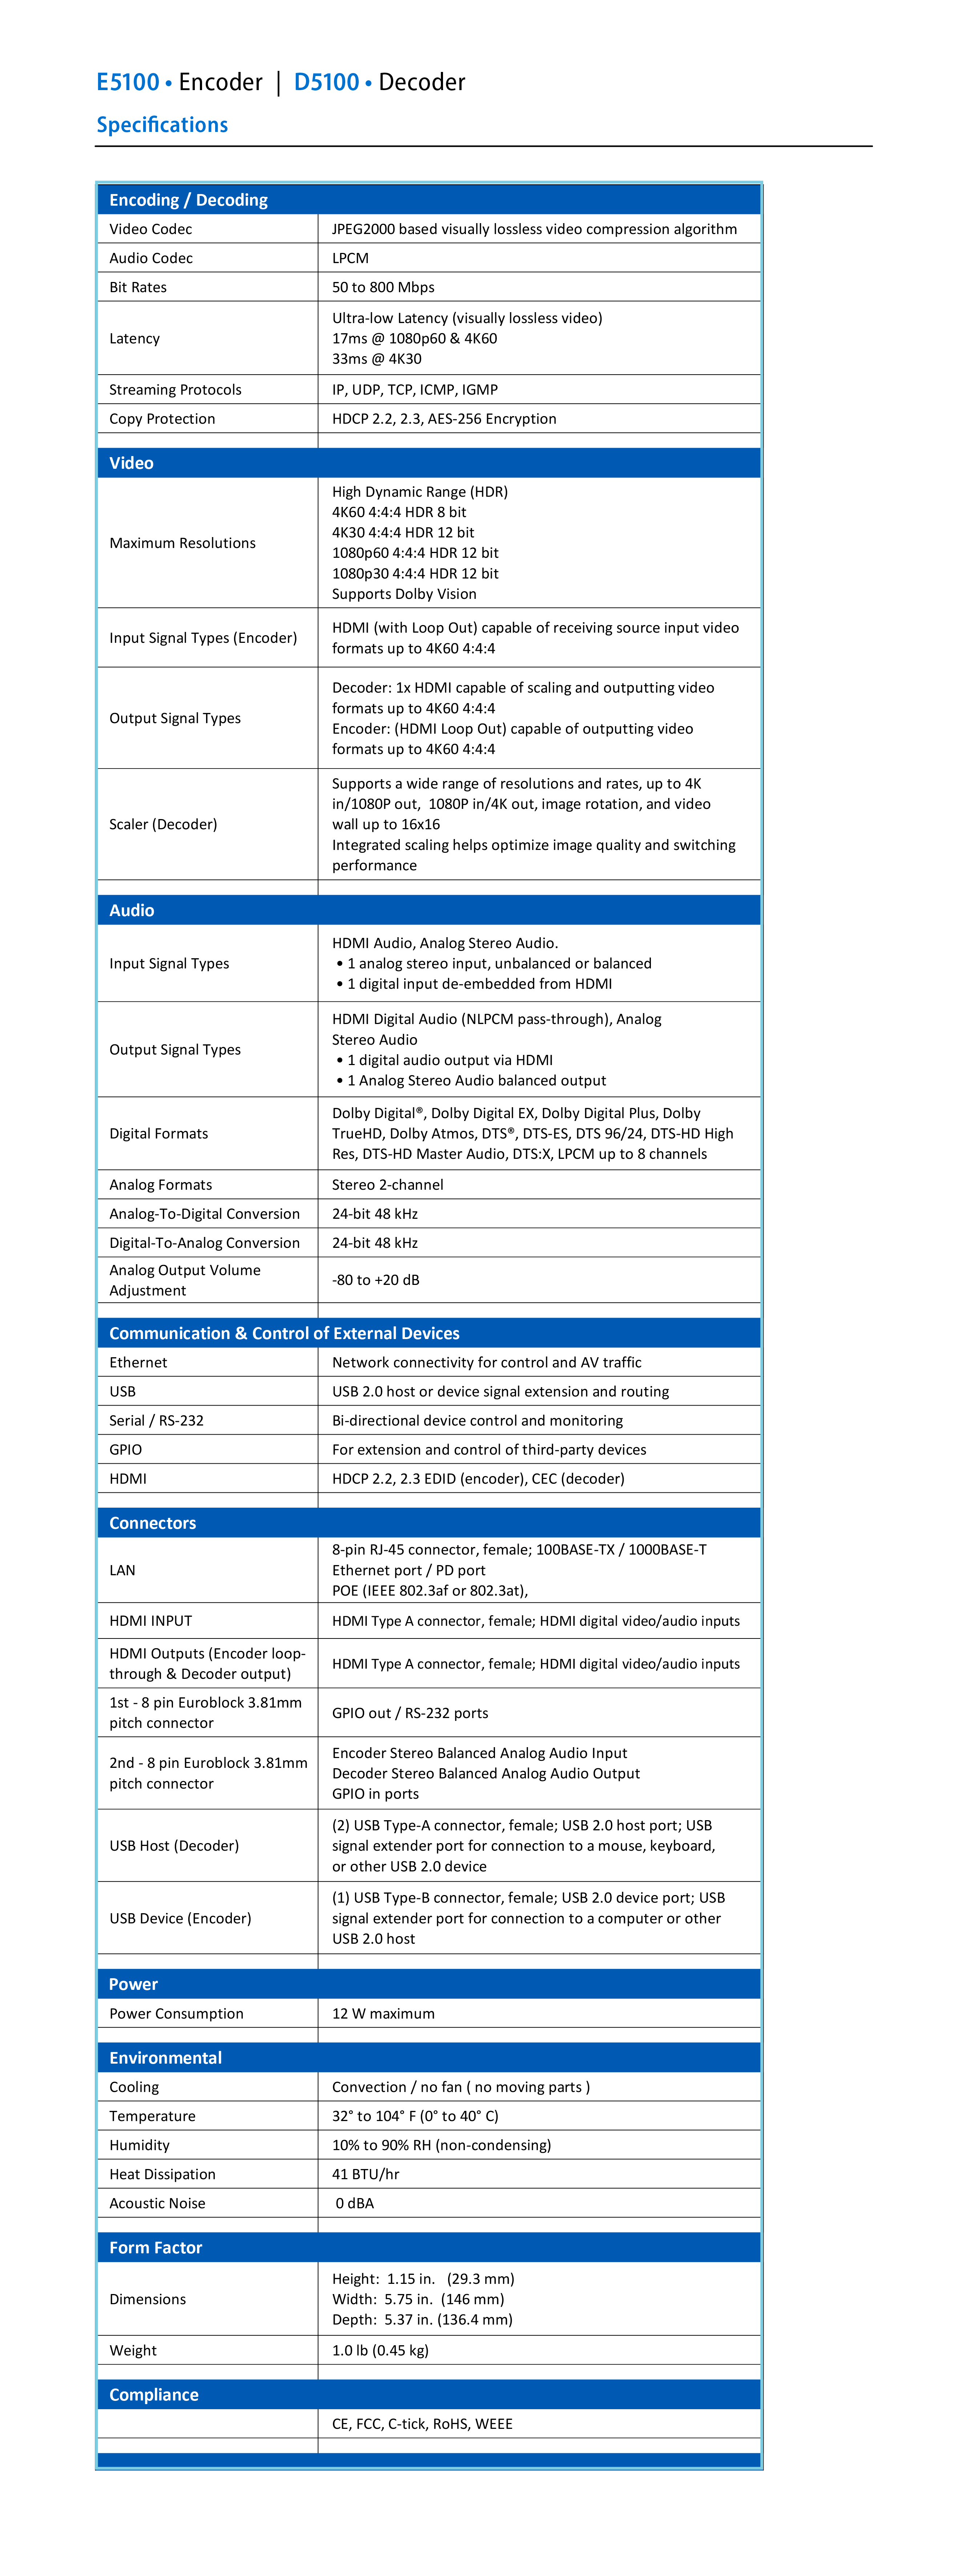 ED5100 Specifications